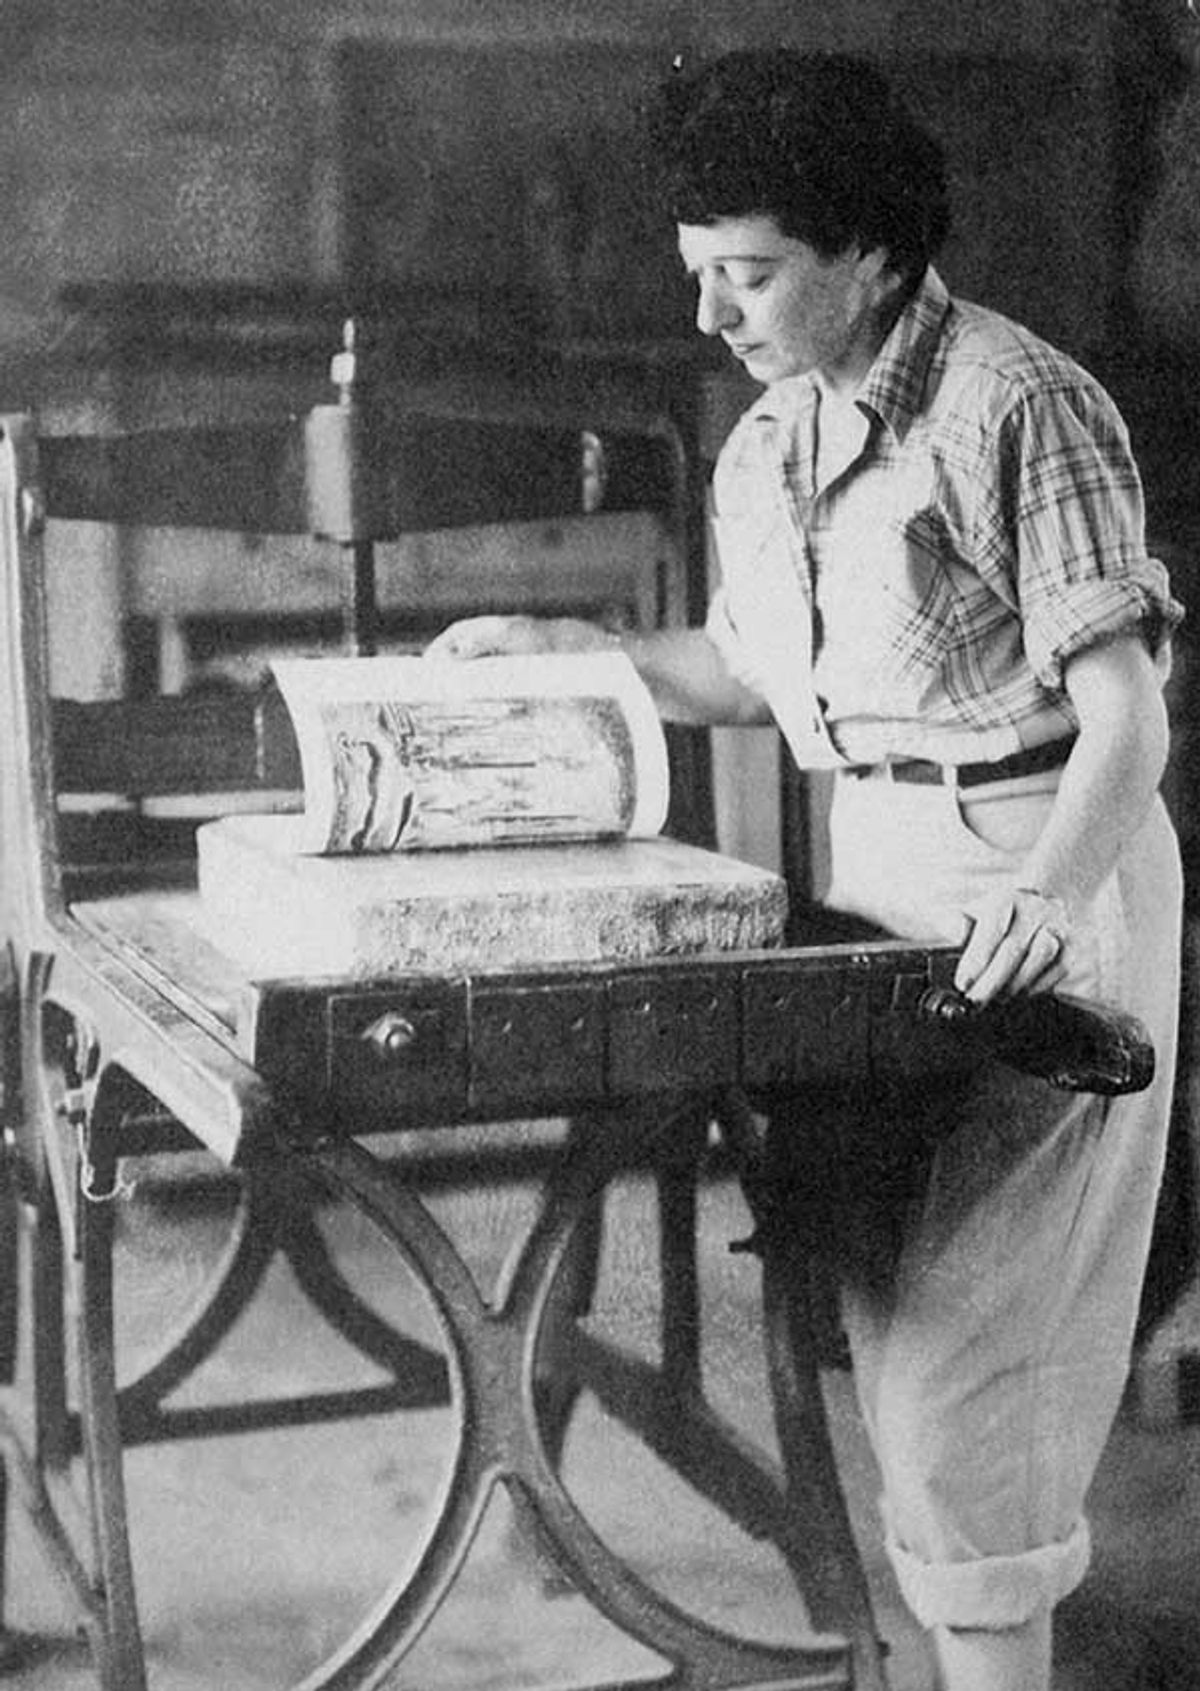 Margaret Lowengrund printing River Traffic in Woodstock, around 1946; she opened The Contemporaries in 1952

Courtesy Print Center New York
